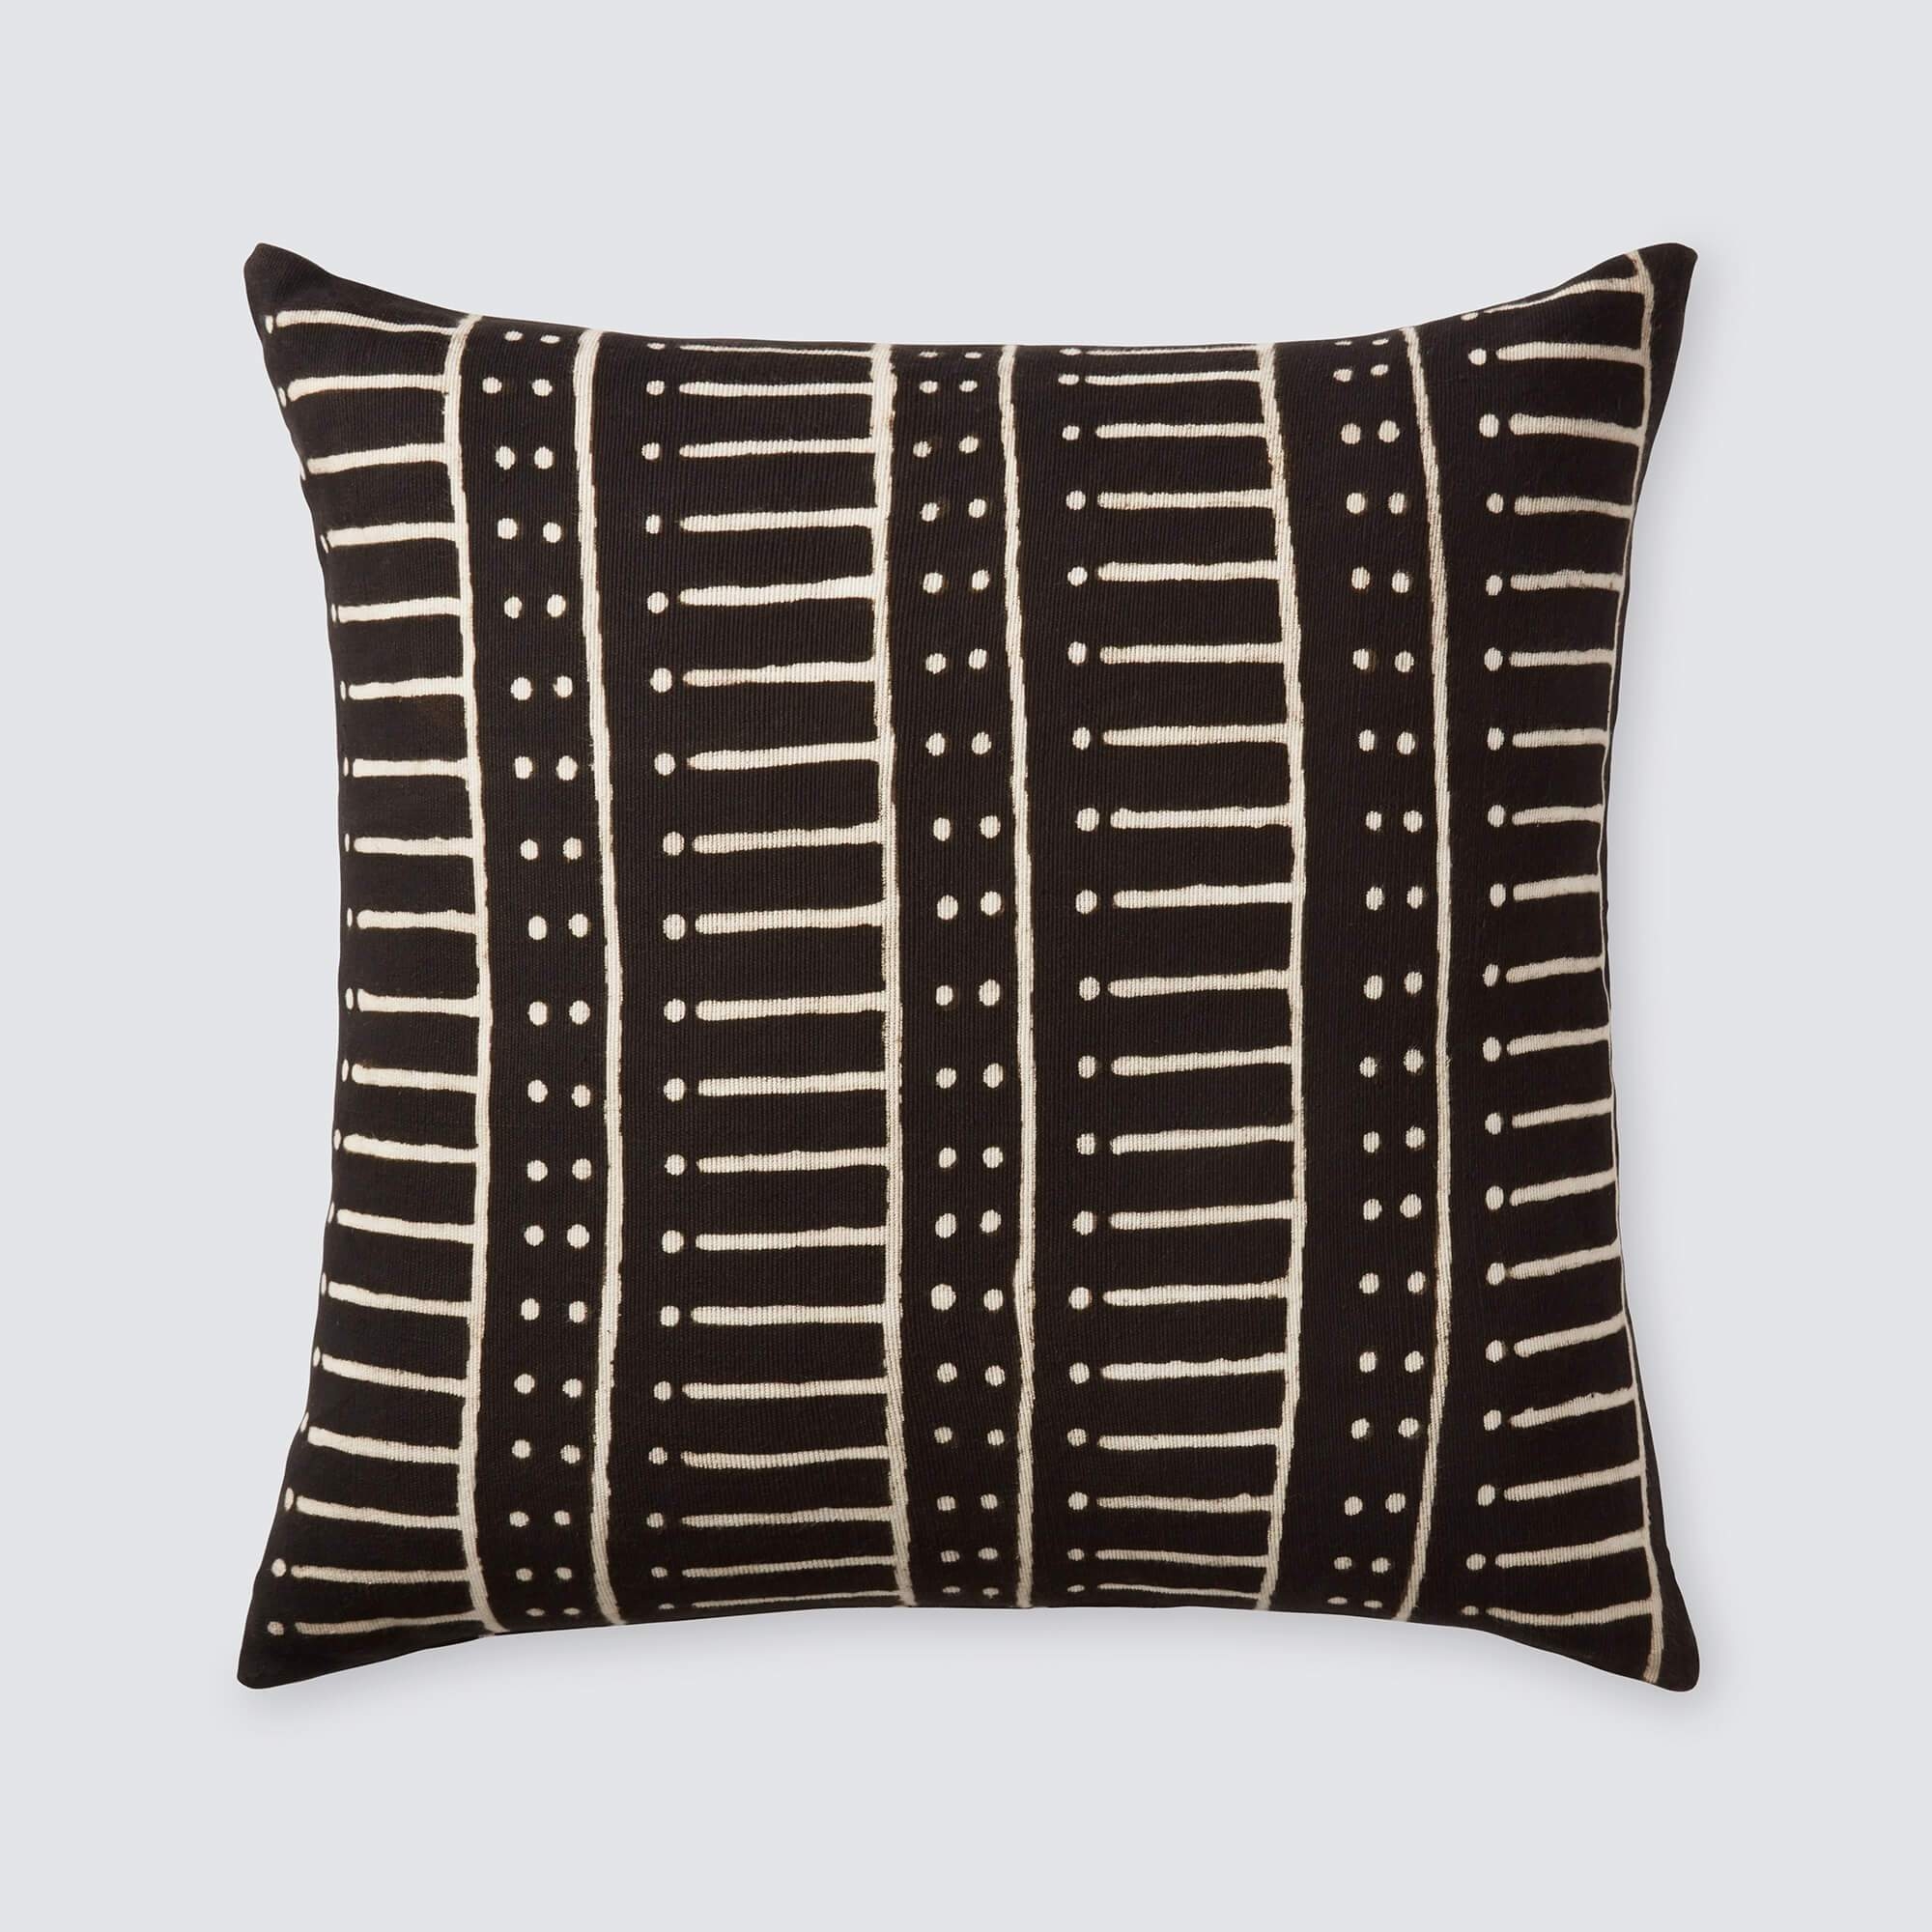 Etoile Mud Cloth Pillow By The Citizenry - Image 0